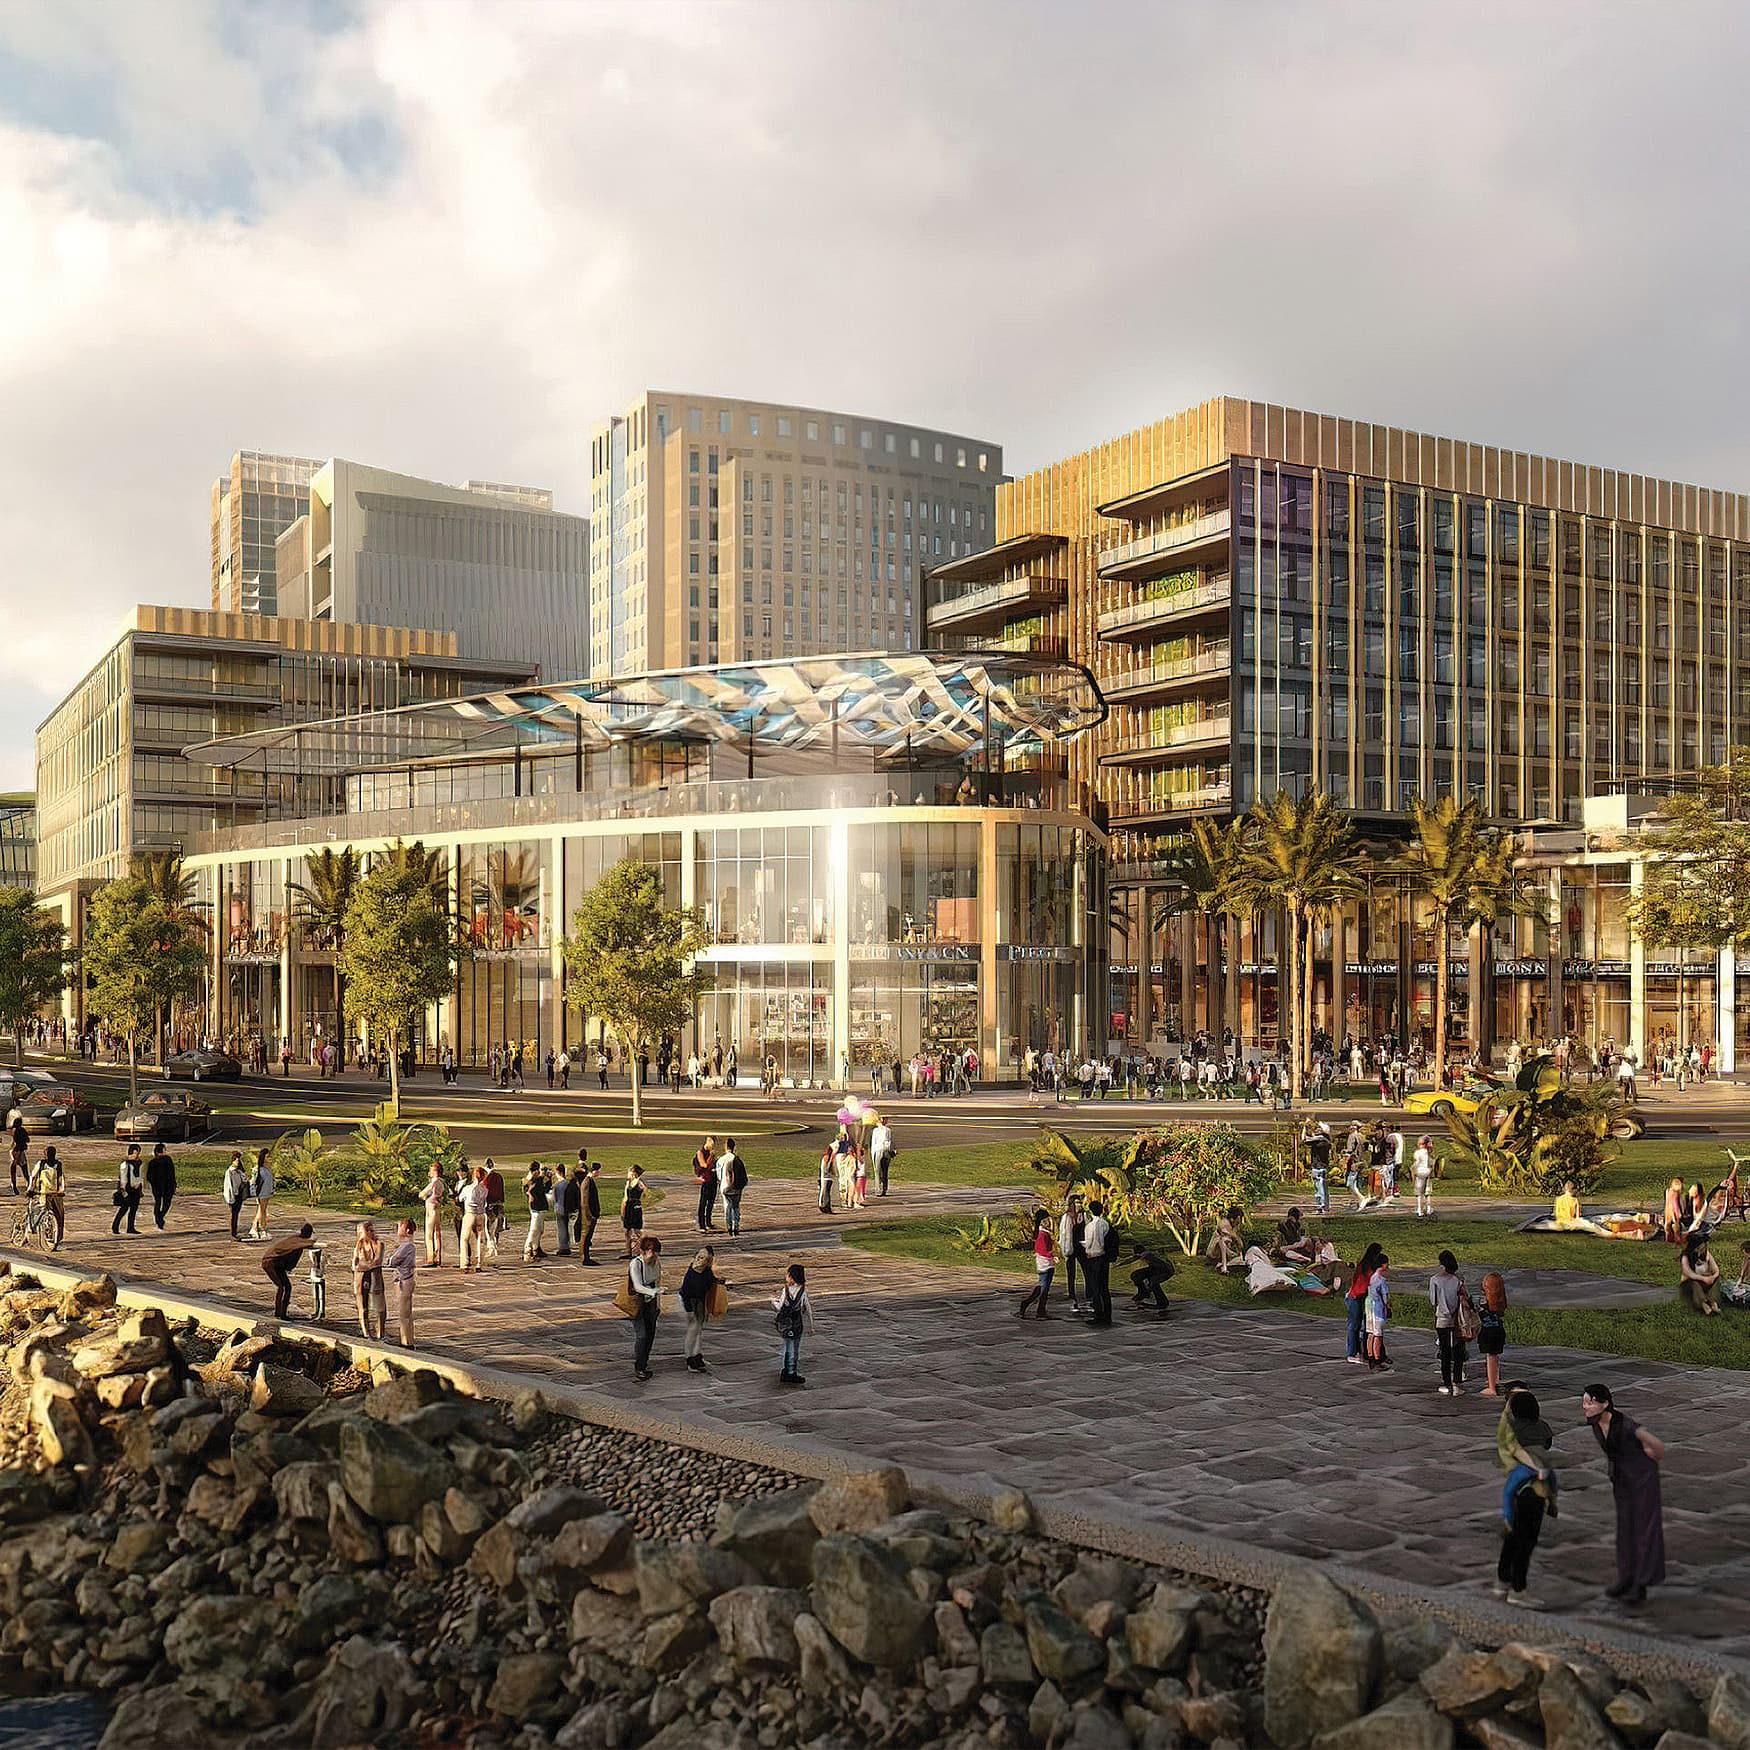 The Research and Development District (RaDD) on the waterfront of downtown San Diego, California.